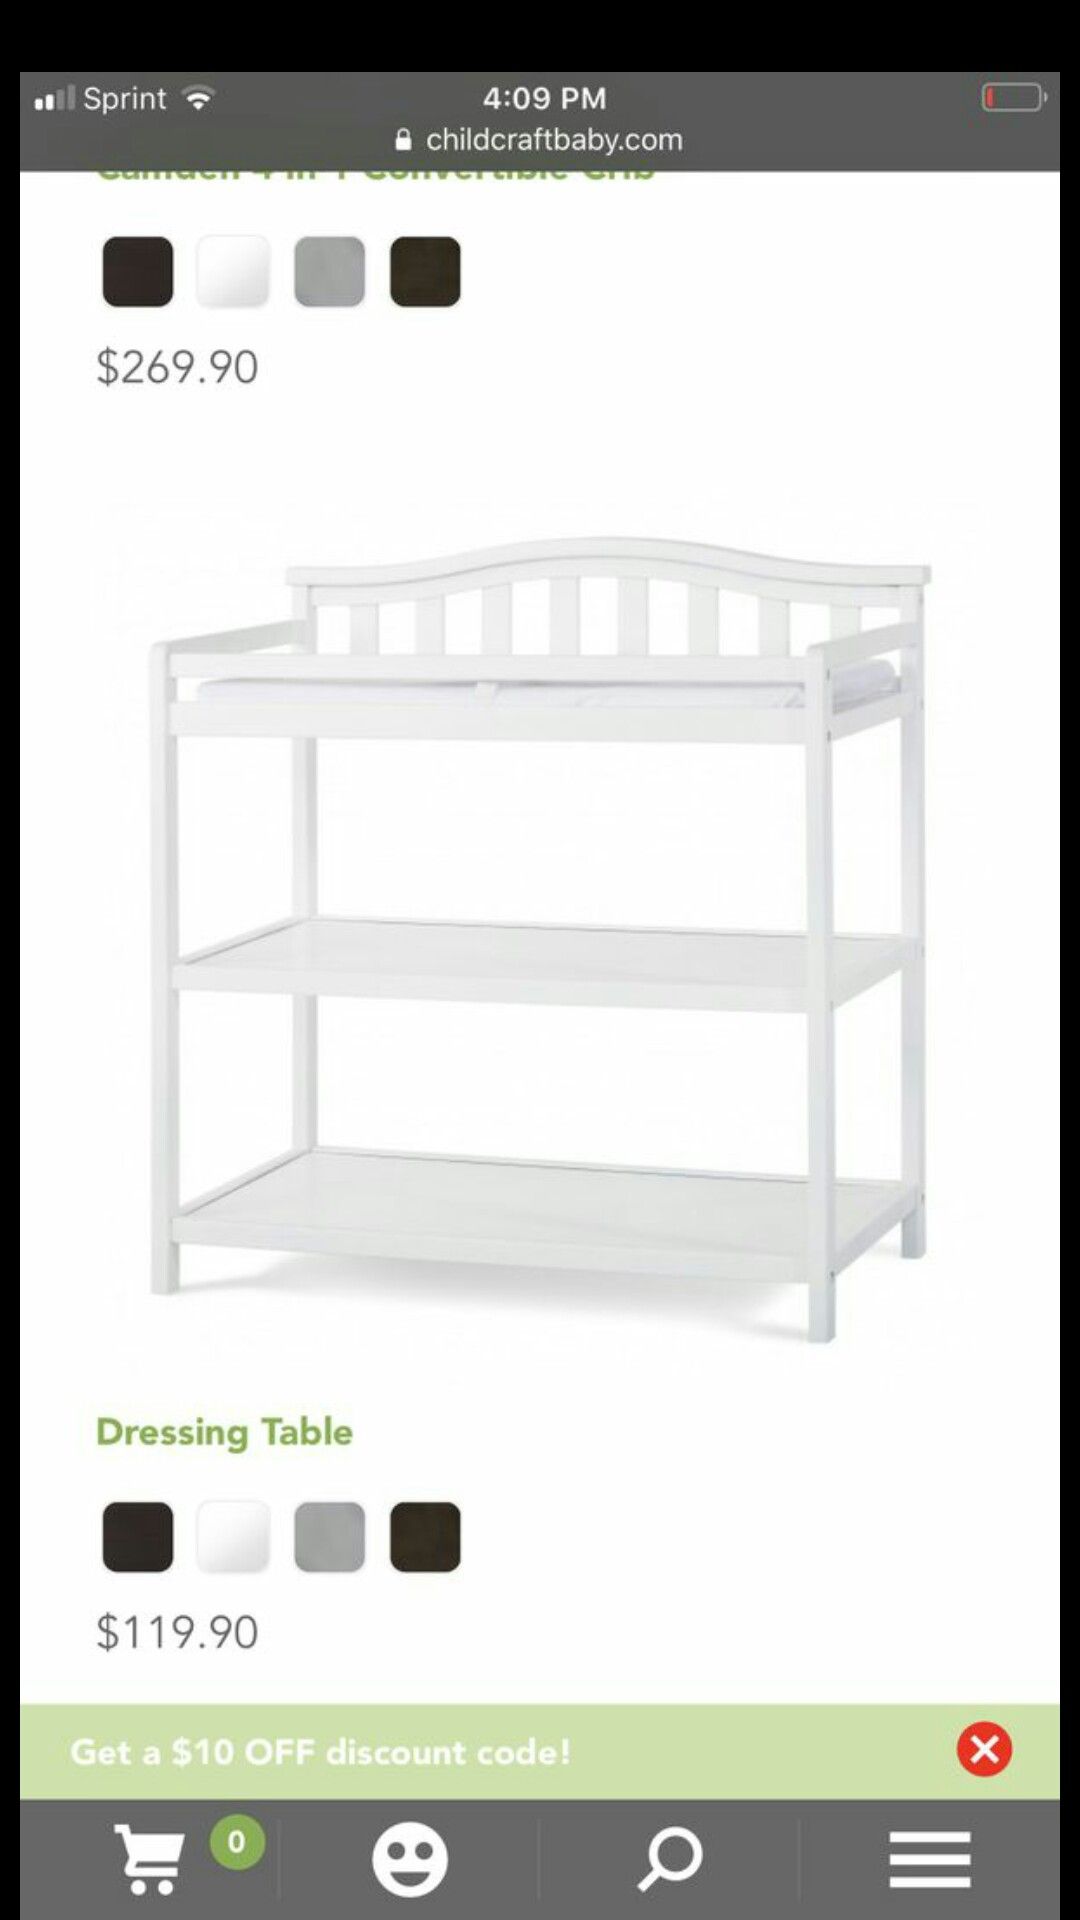 Brand new dressing and changing table